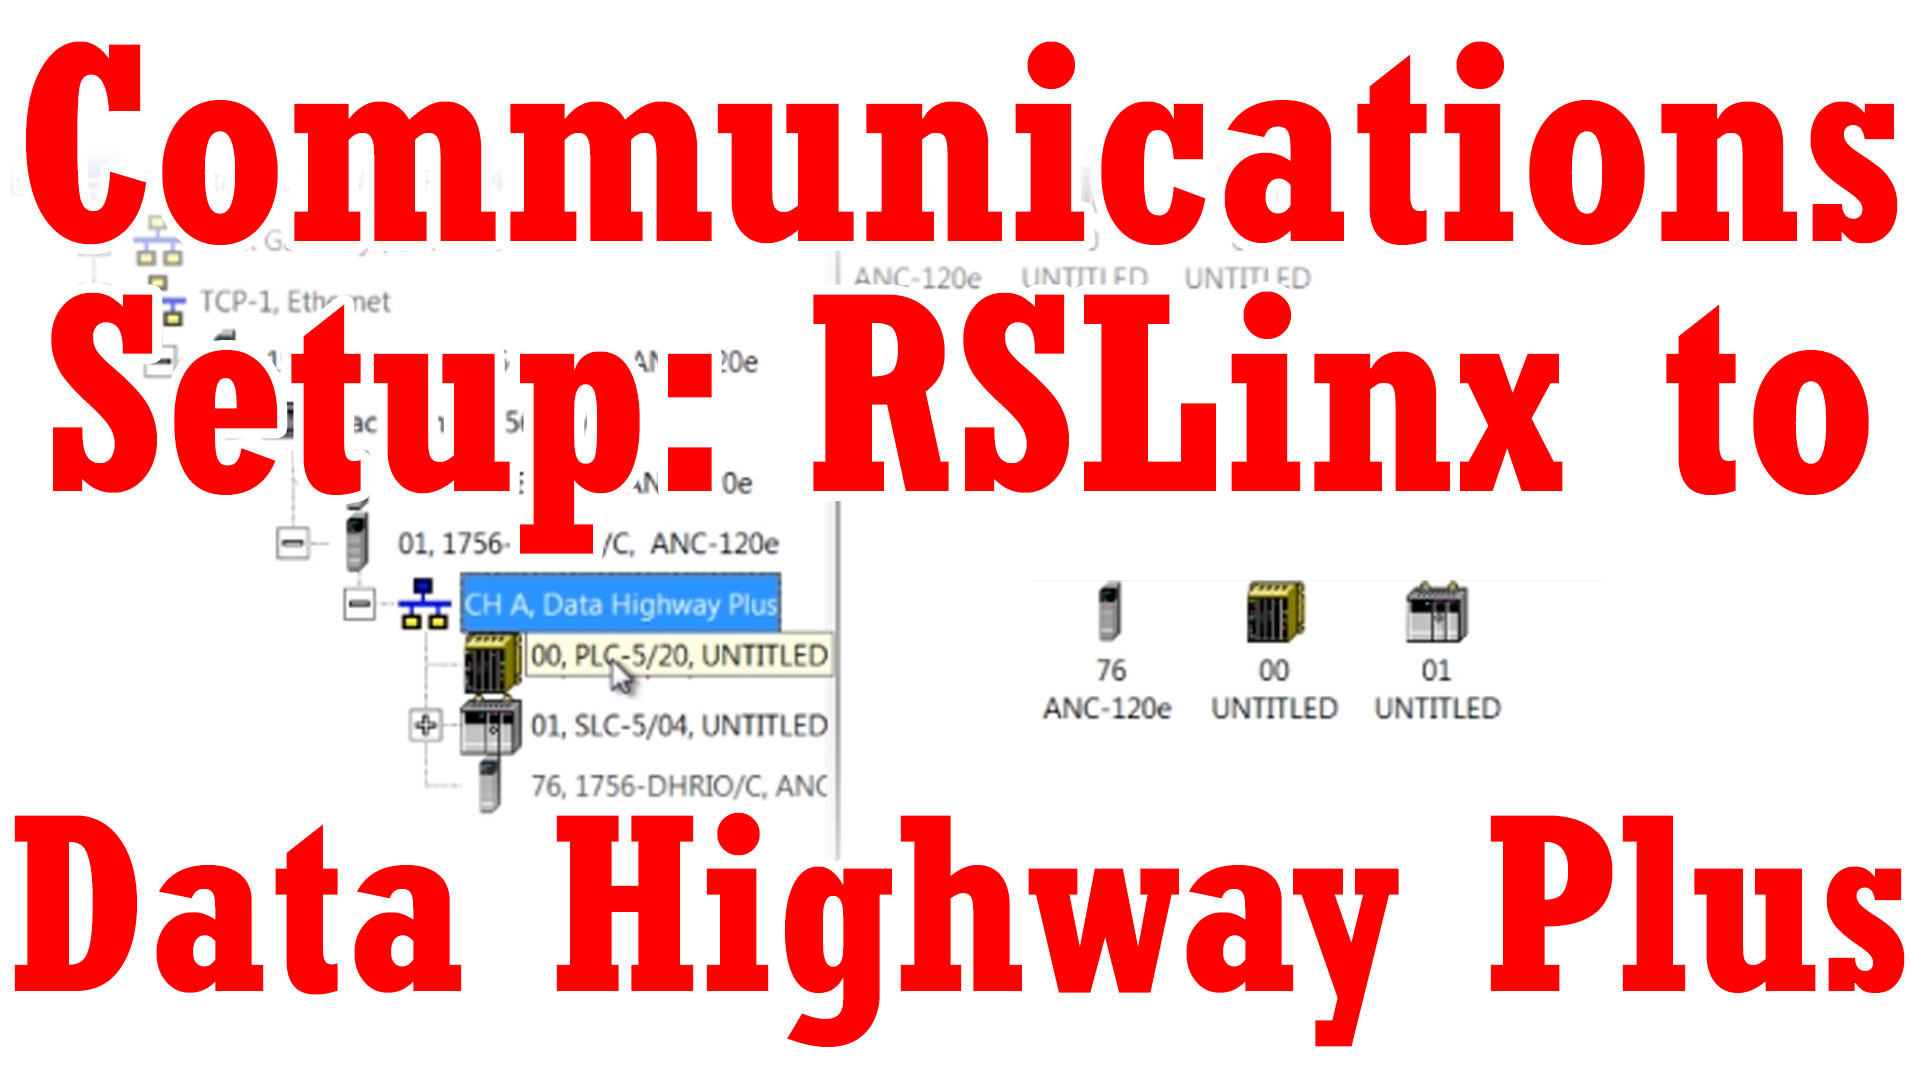 USB to Data Highway Plus (DHP, DH+) – Setup RSLinx with ANC-120e and Download to PLC-5 and SLC-500 using RSLogix (M3E19)